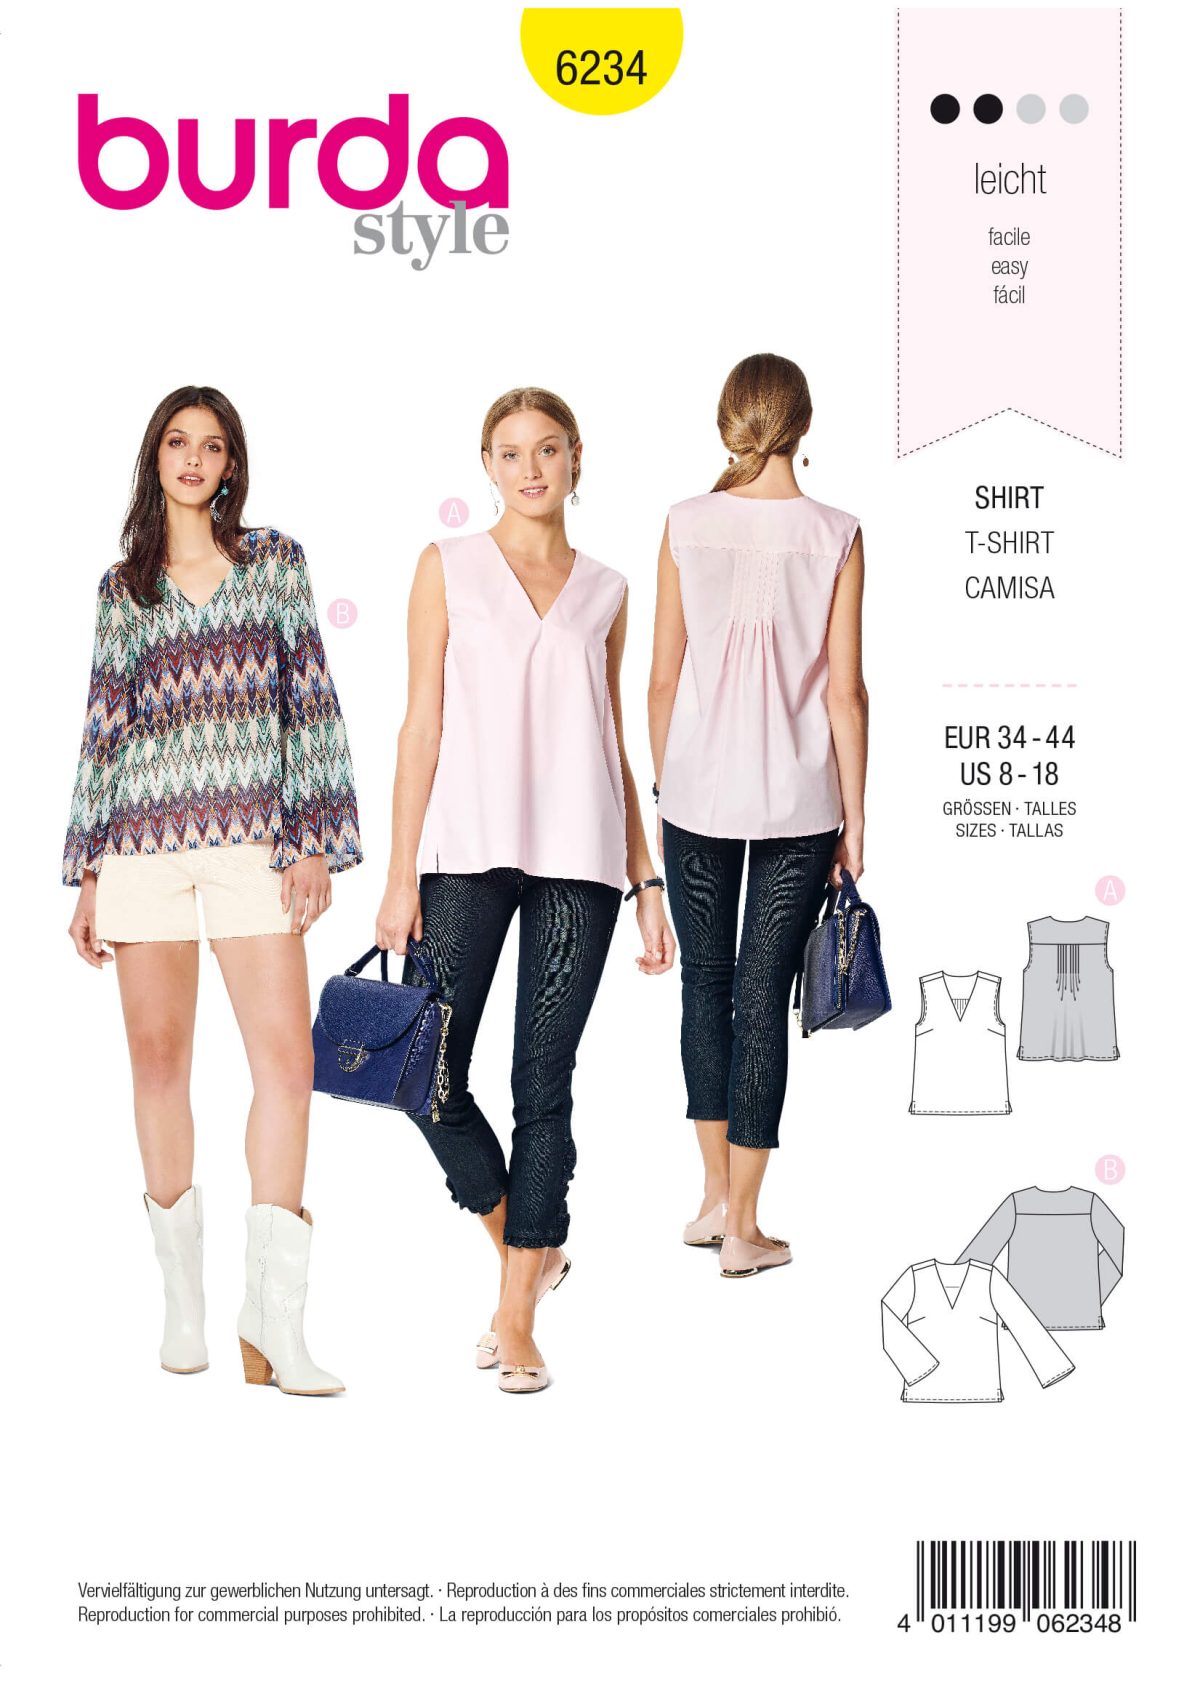 Burda Style Pattern 6234 Misses' Tops With Variations